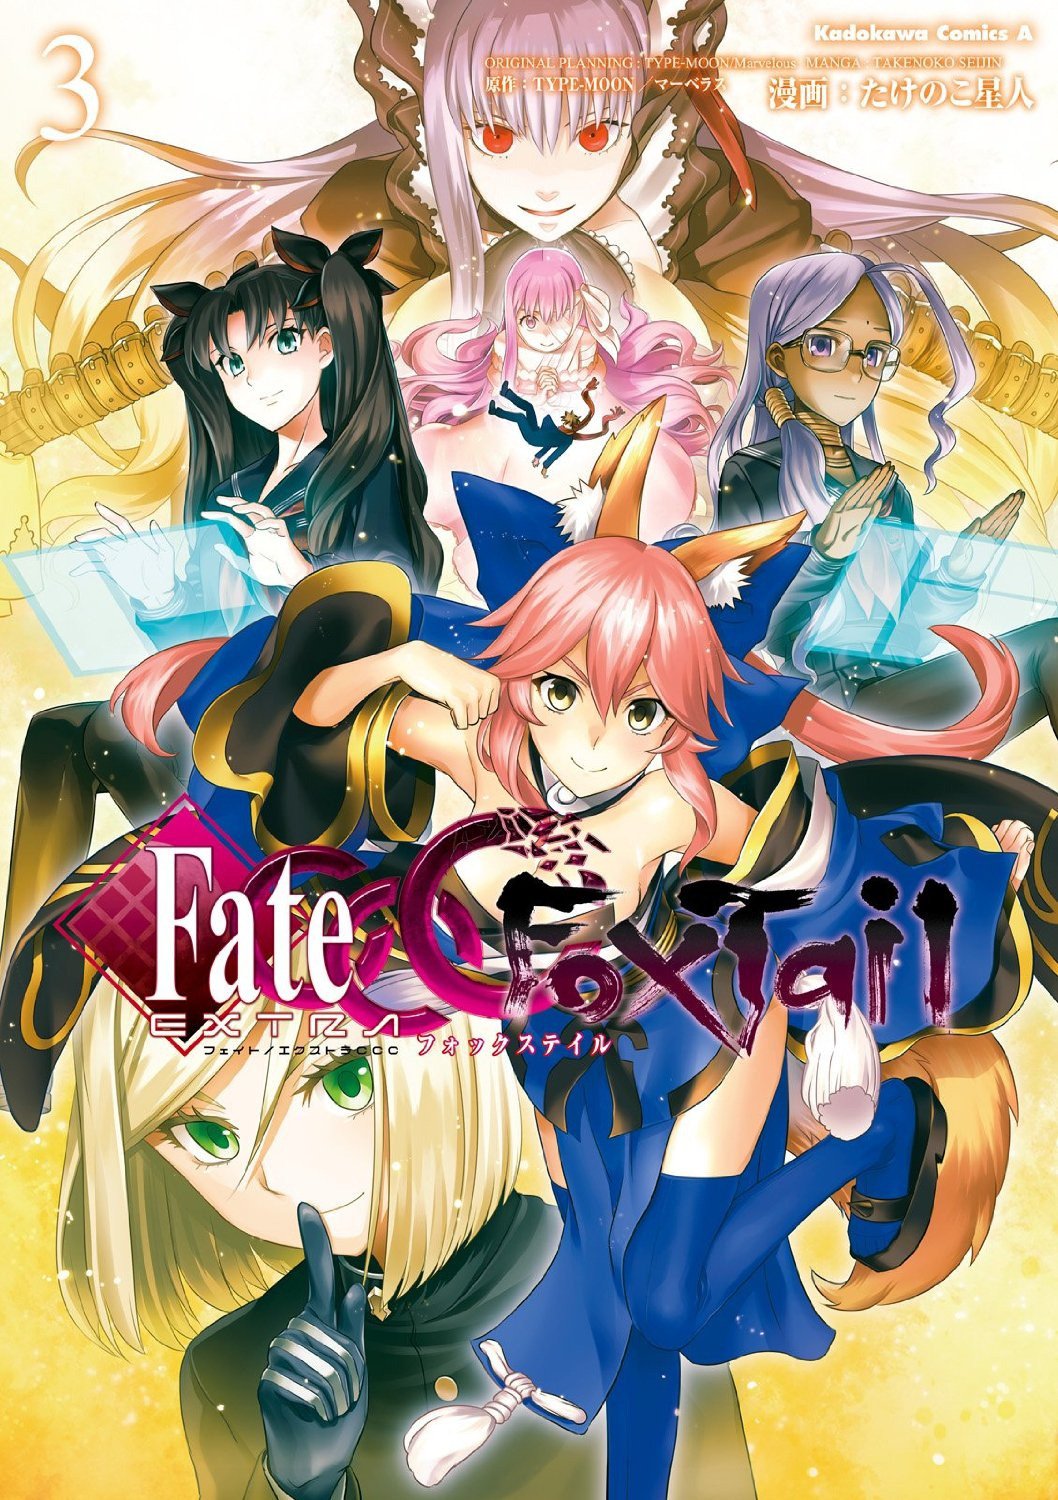 Type Moon たけのこ星人 Fate Extra Ccc Foxtail 第01 04巻 Comic Downfan Club